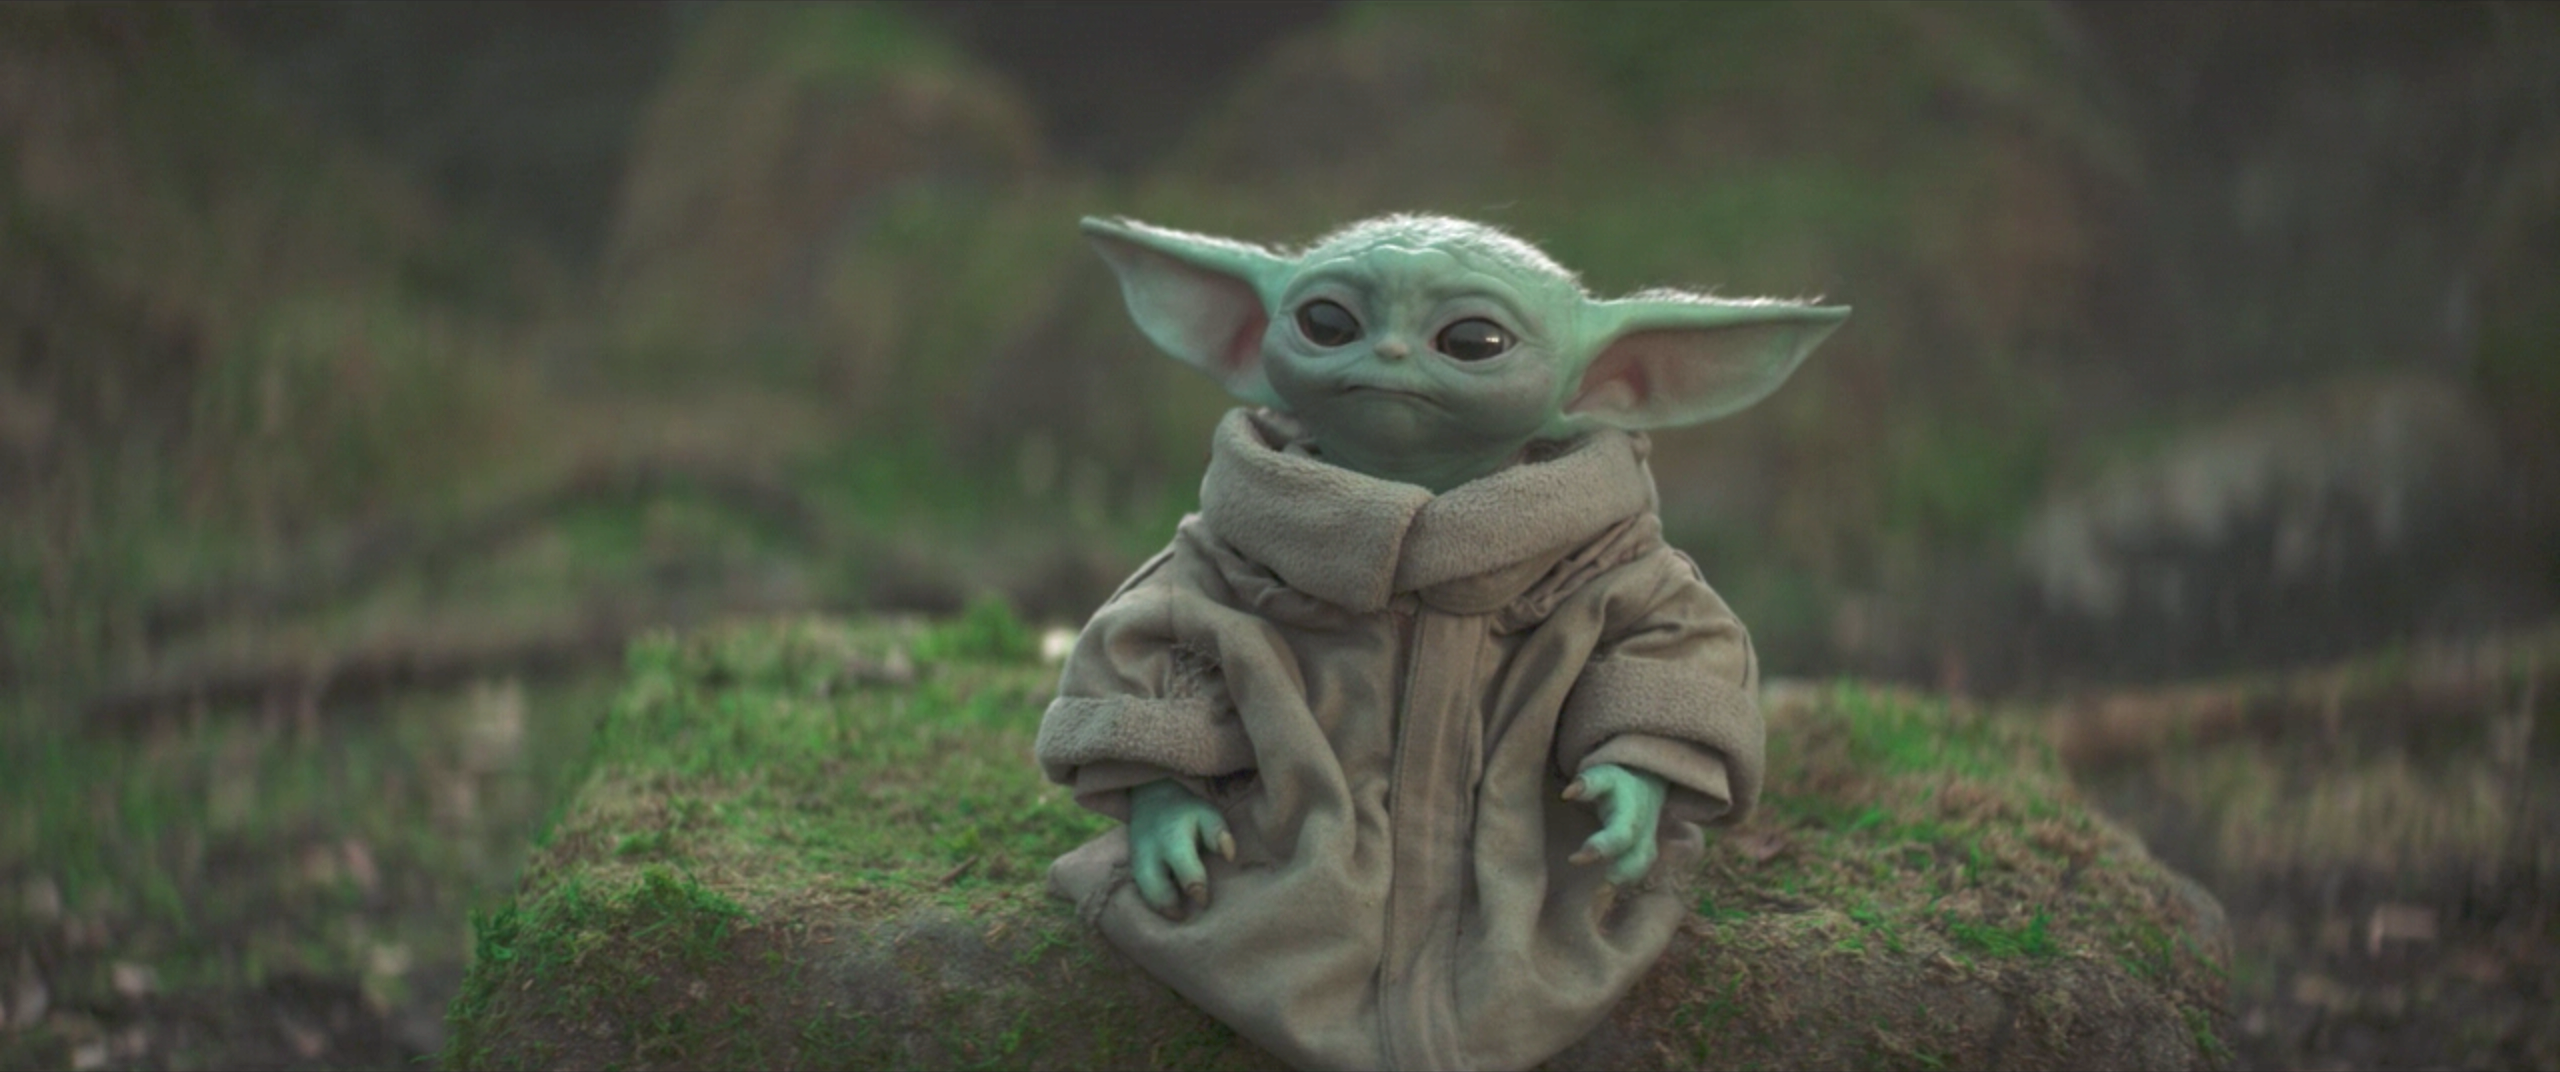 Baby Yoda will always be Baby Yoda in our hearts.